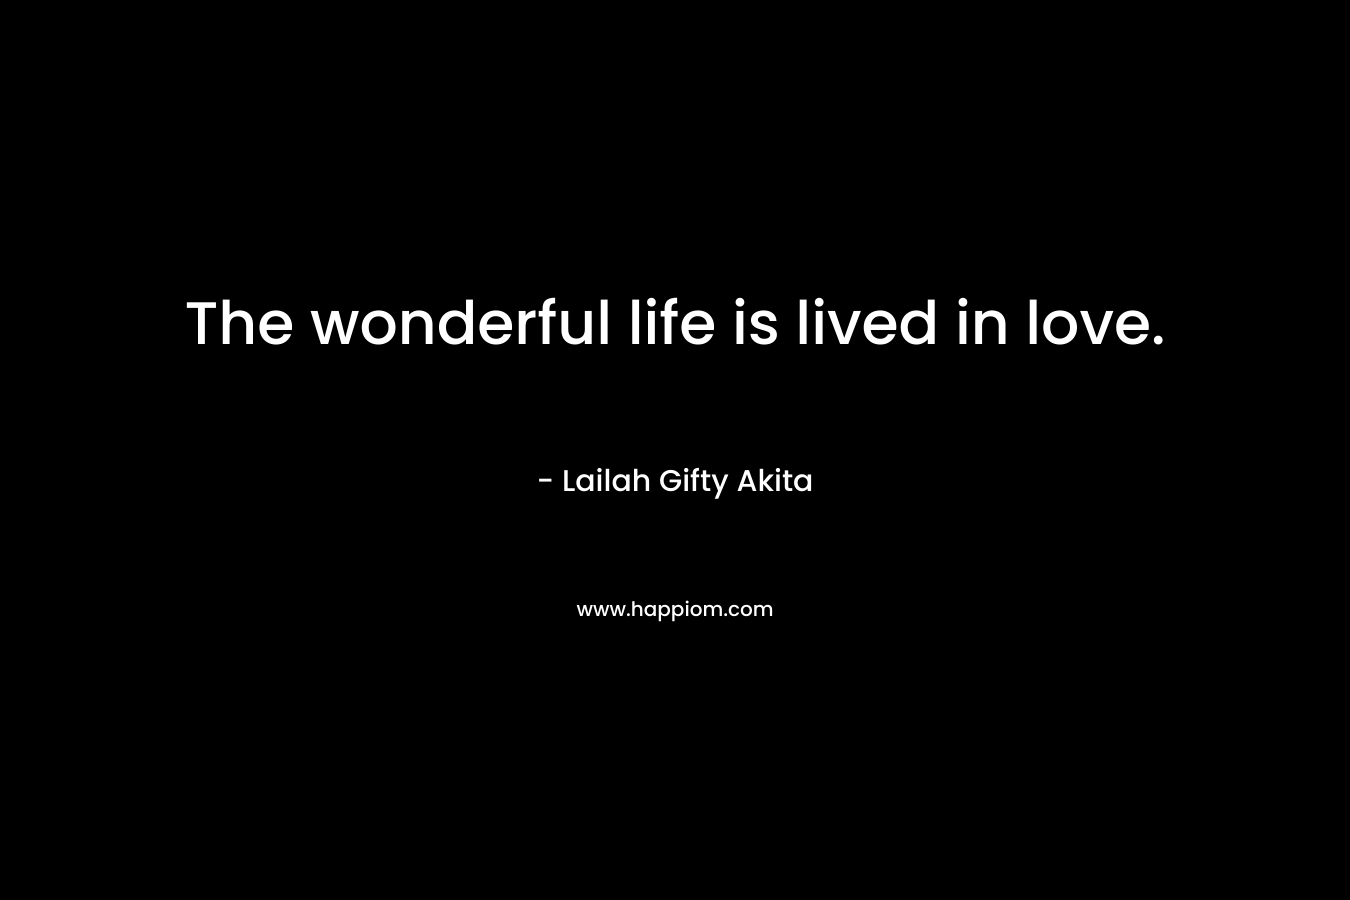 The wonderful life is lived in love.